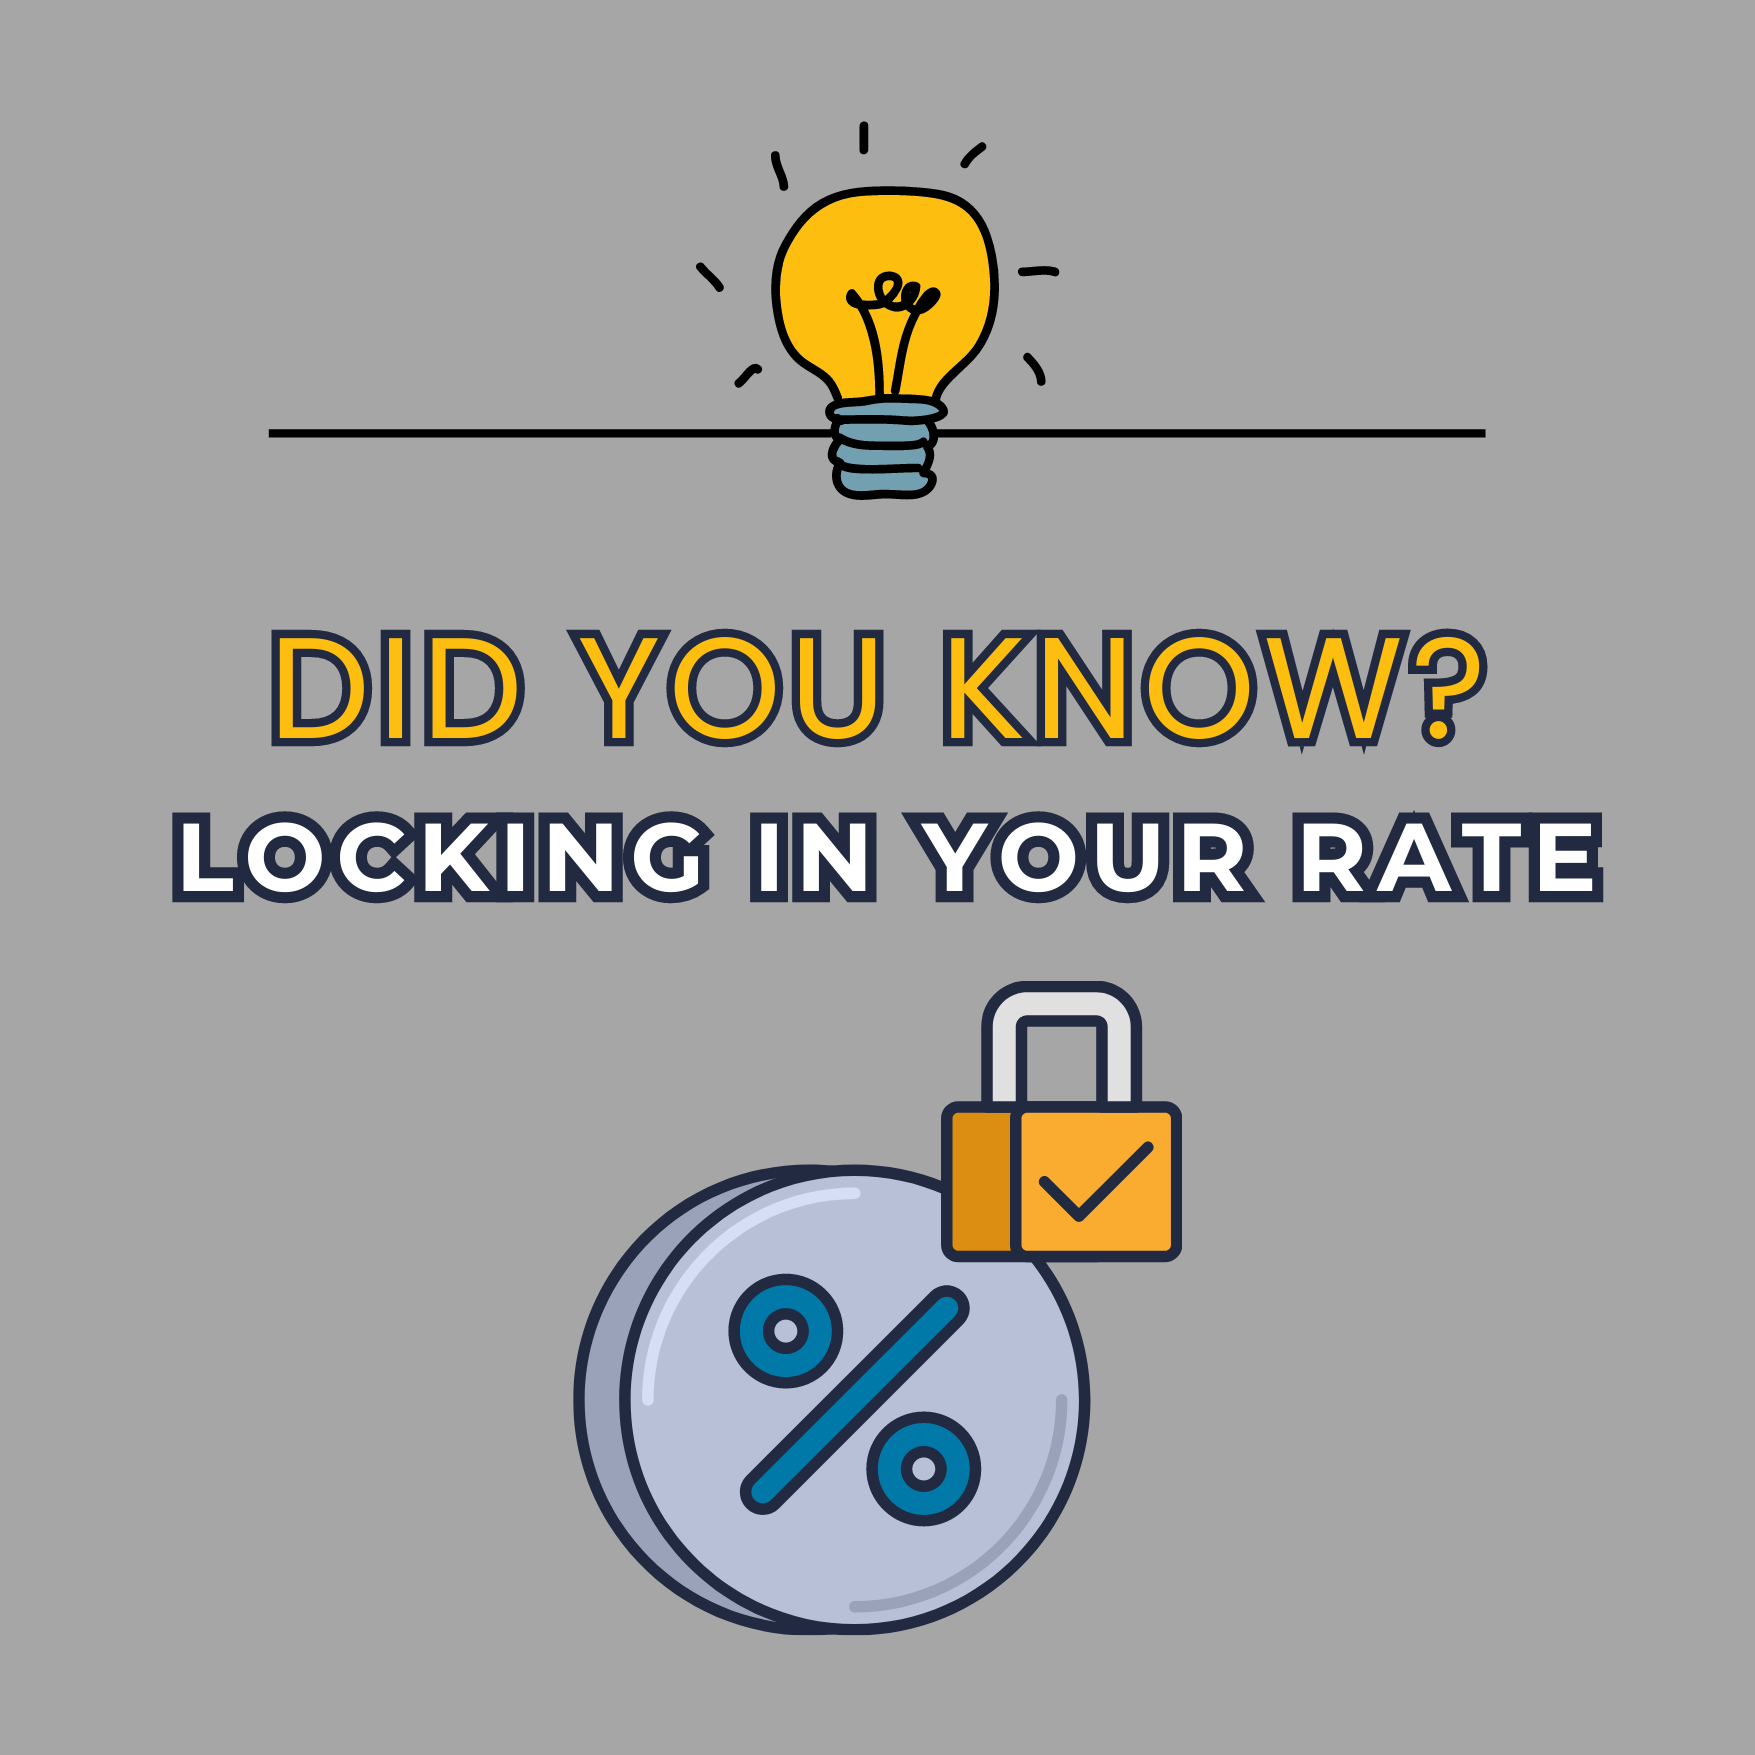 Did You Know? Locking in your RATE